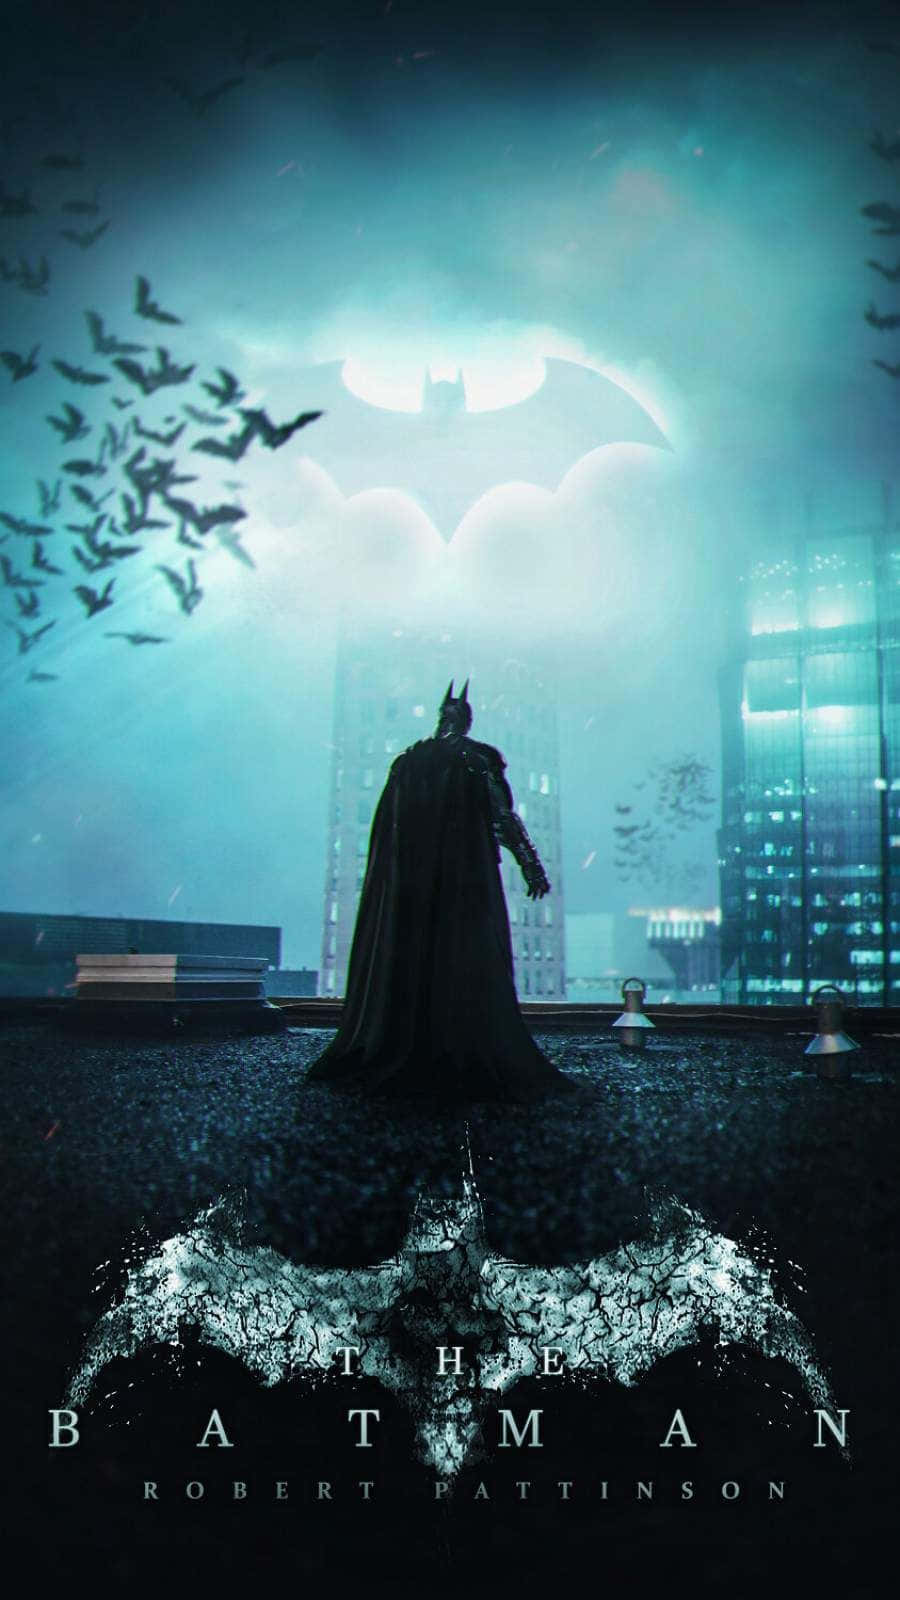 Be awesome and brave like Batman with this iPhone! Wallpaper